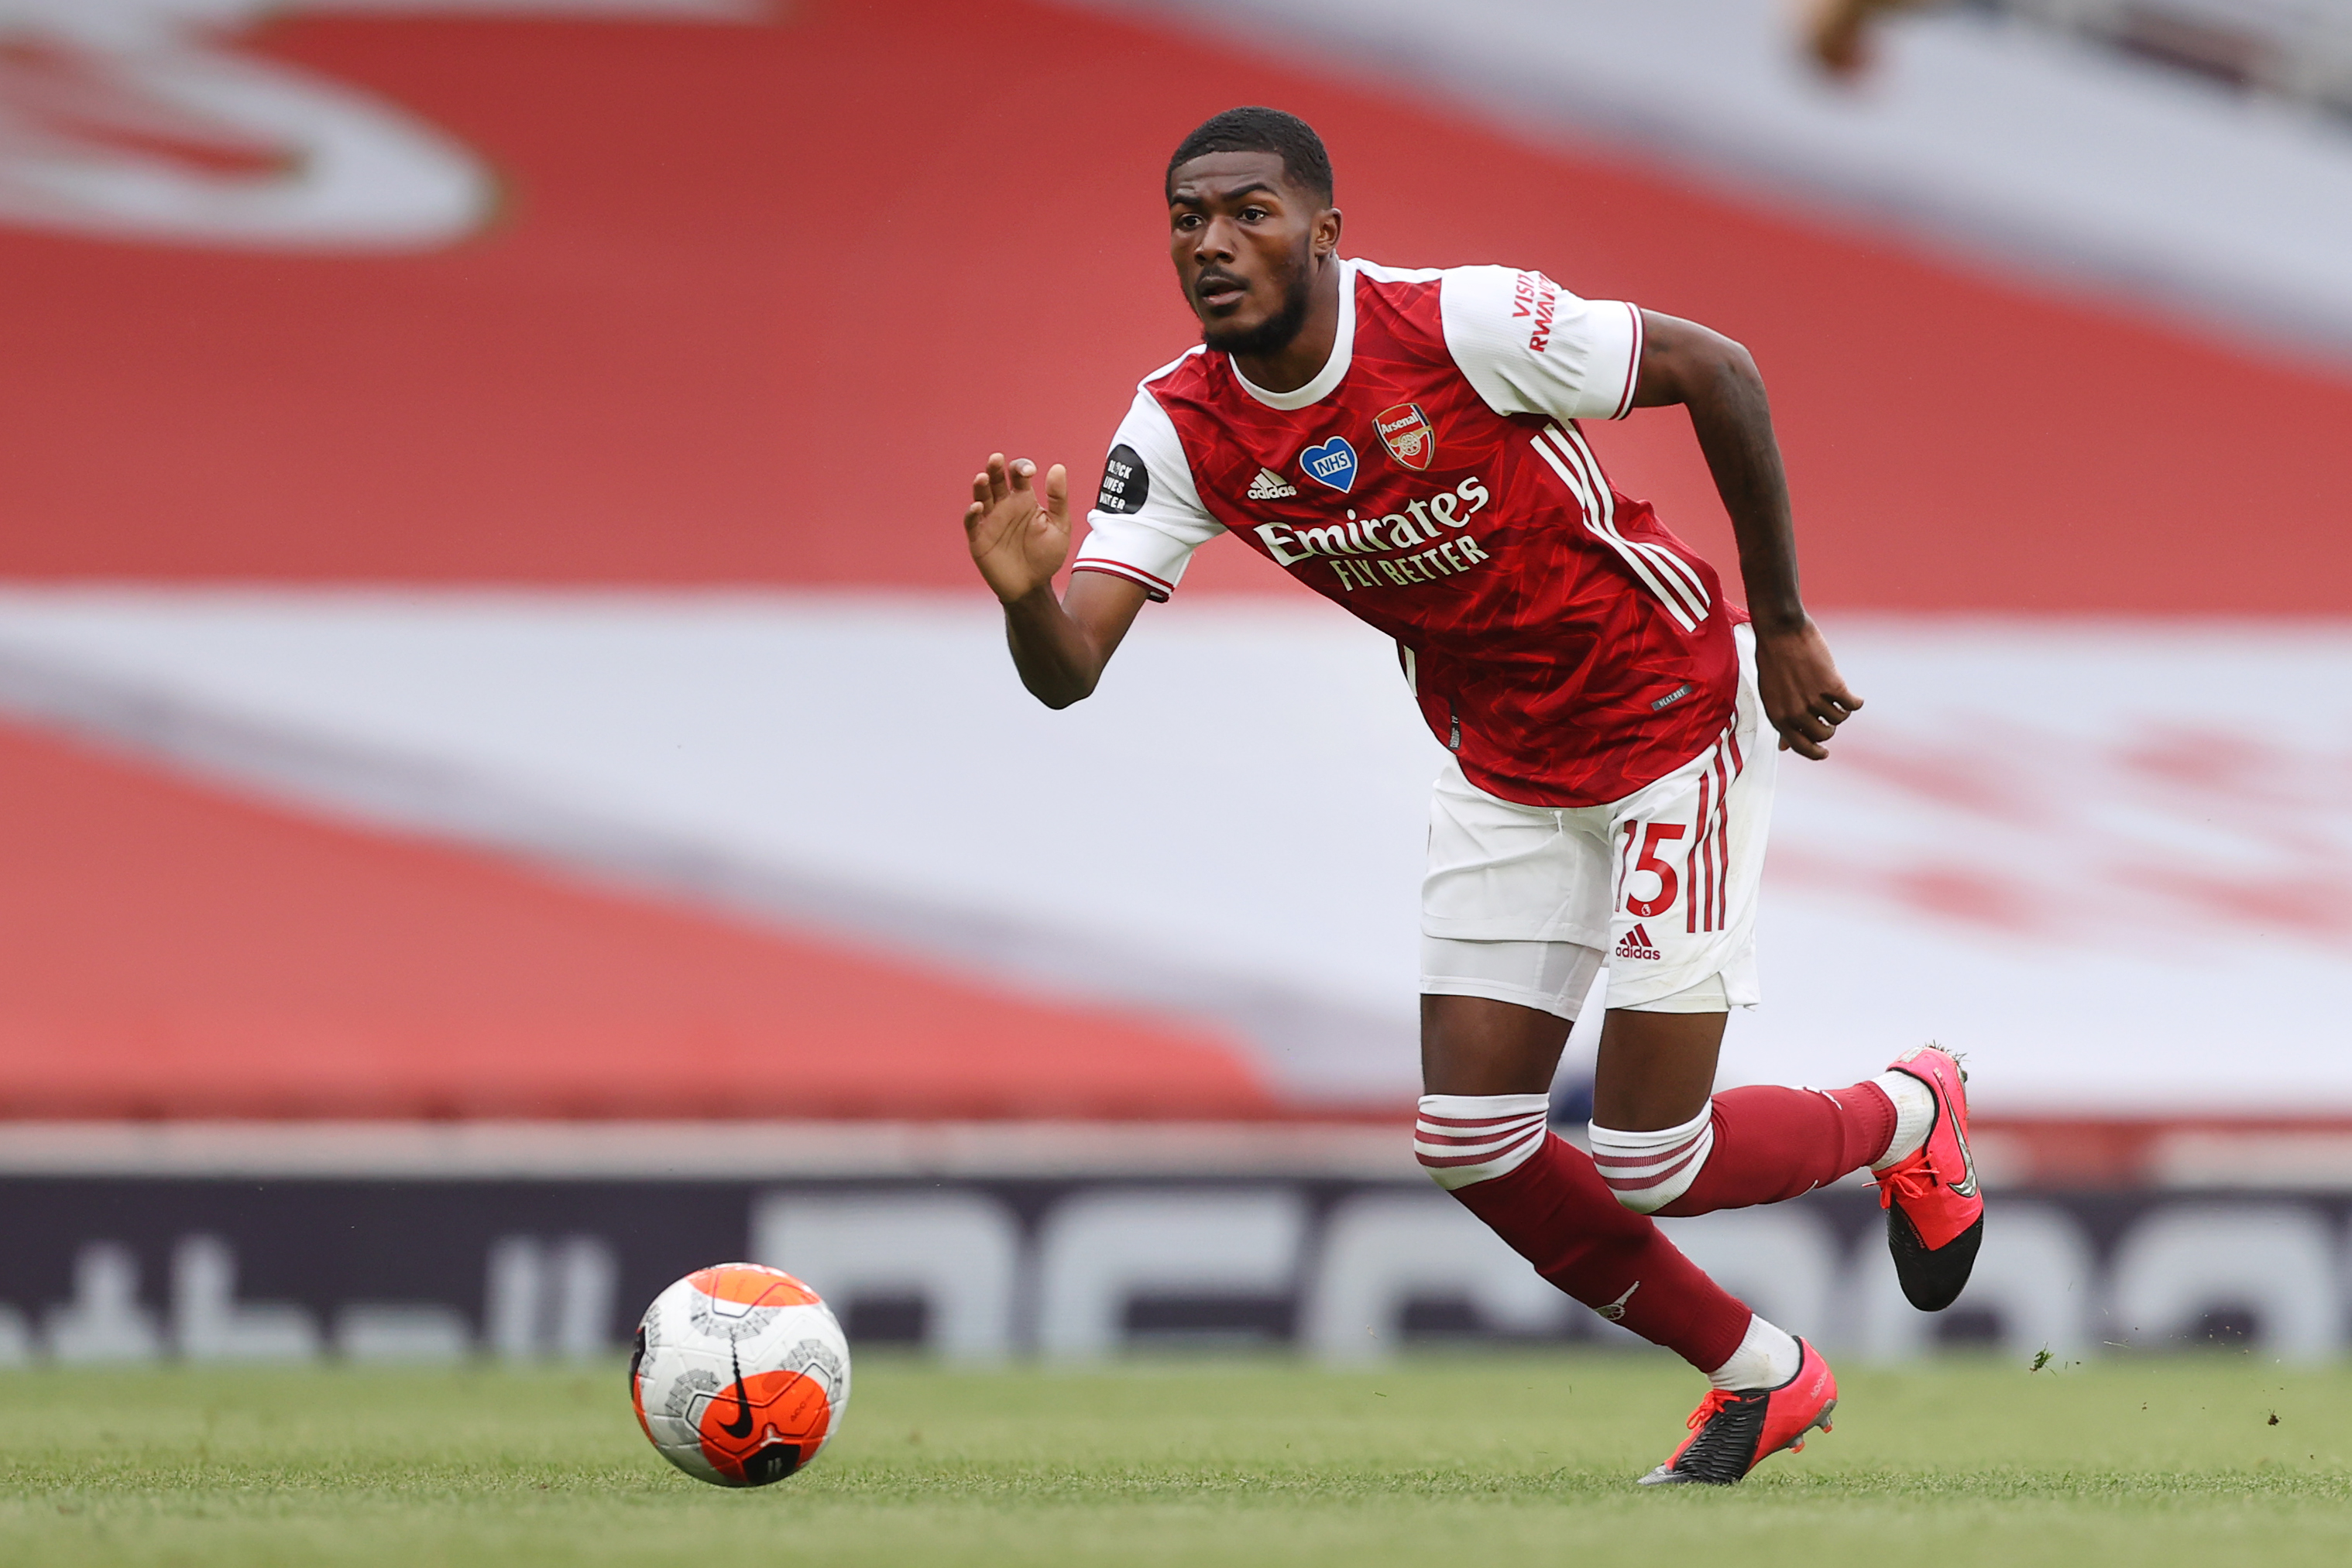 Arsenal's Maitland-Niles joins West Brom on loan